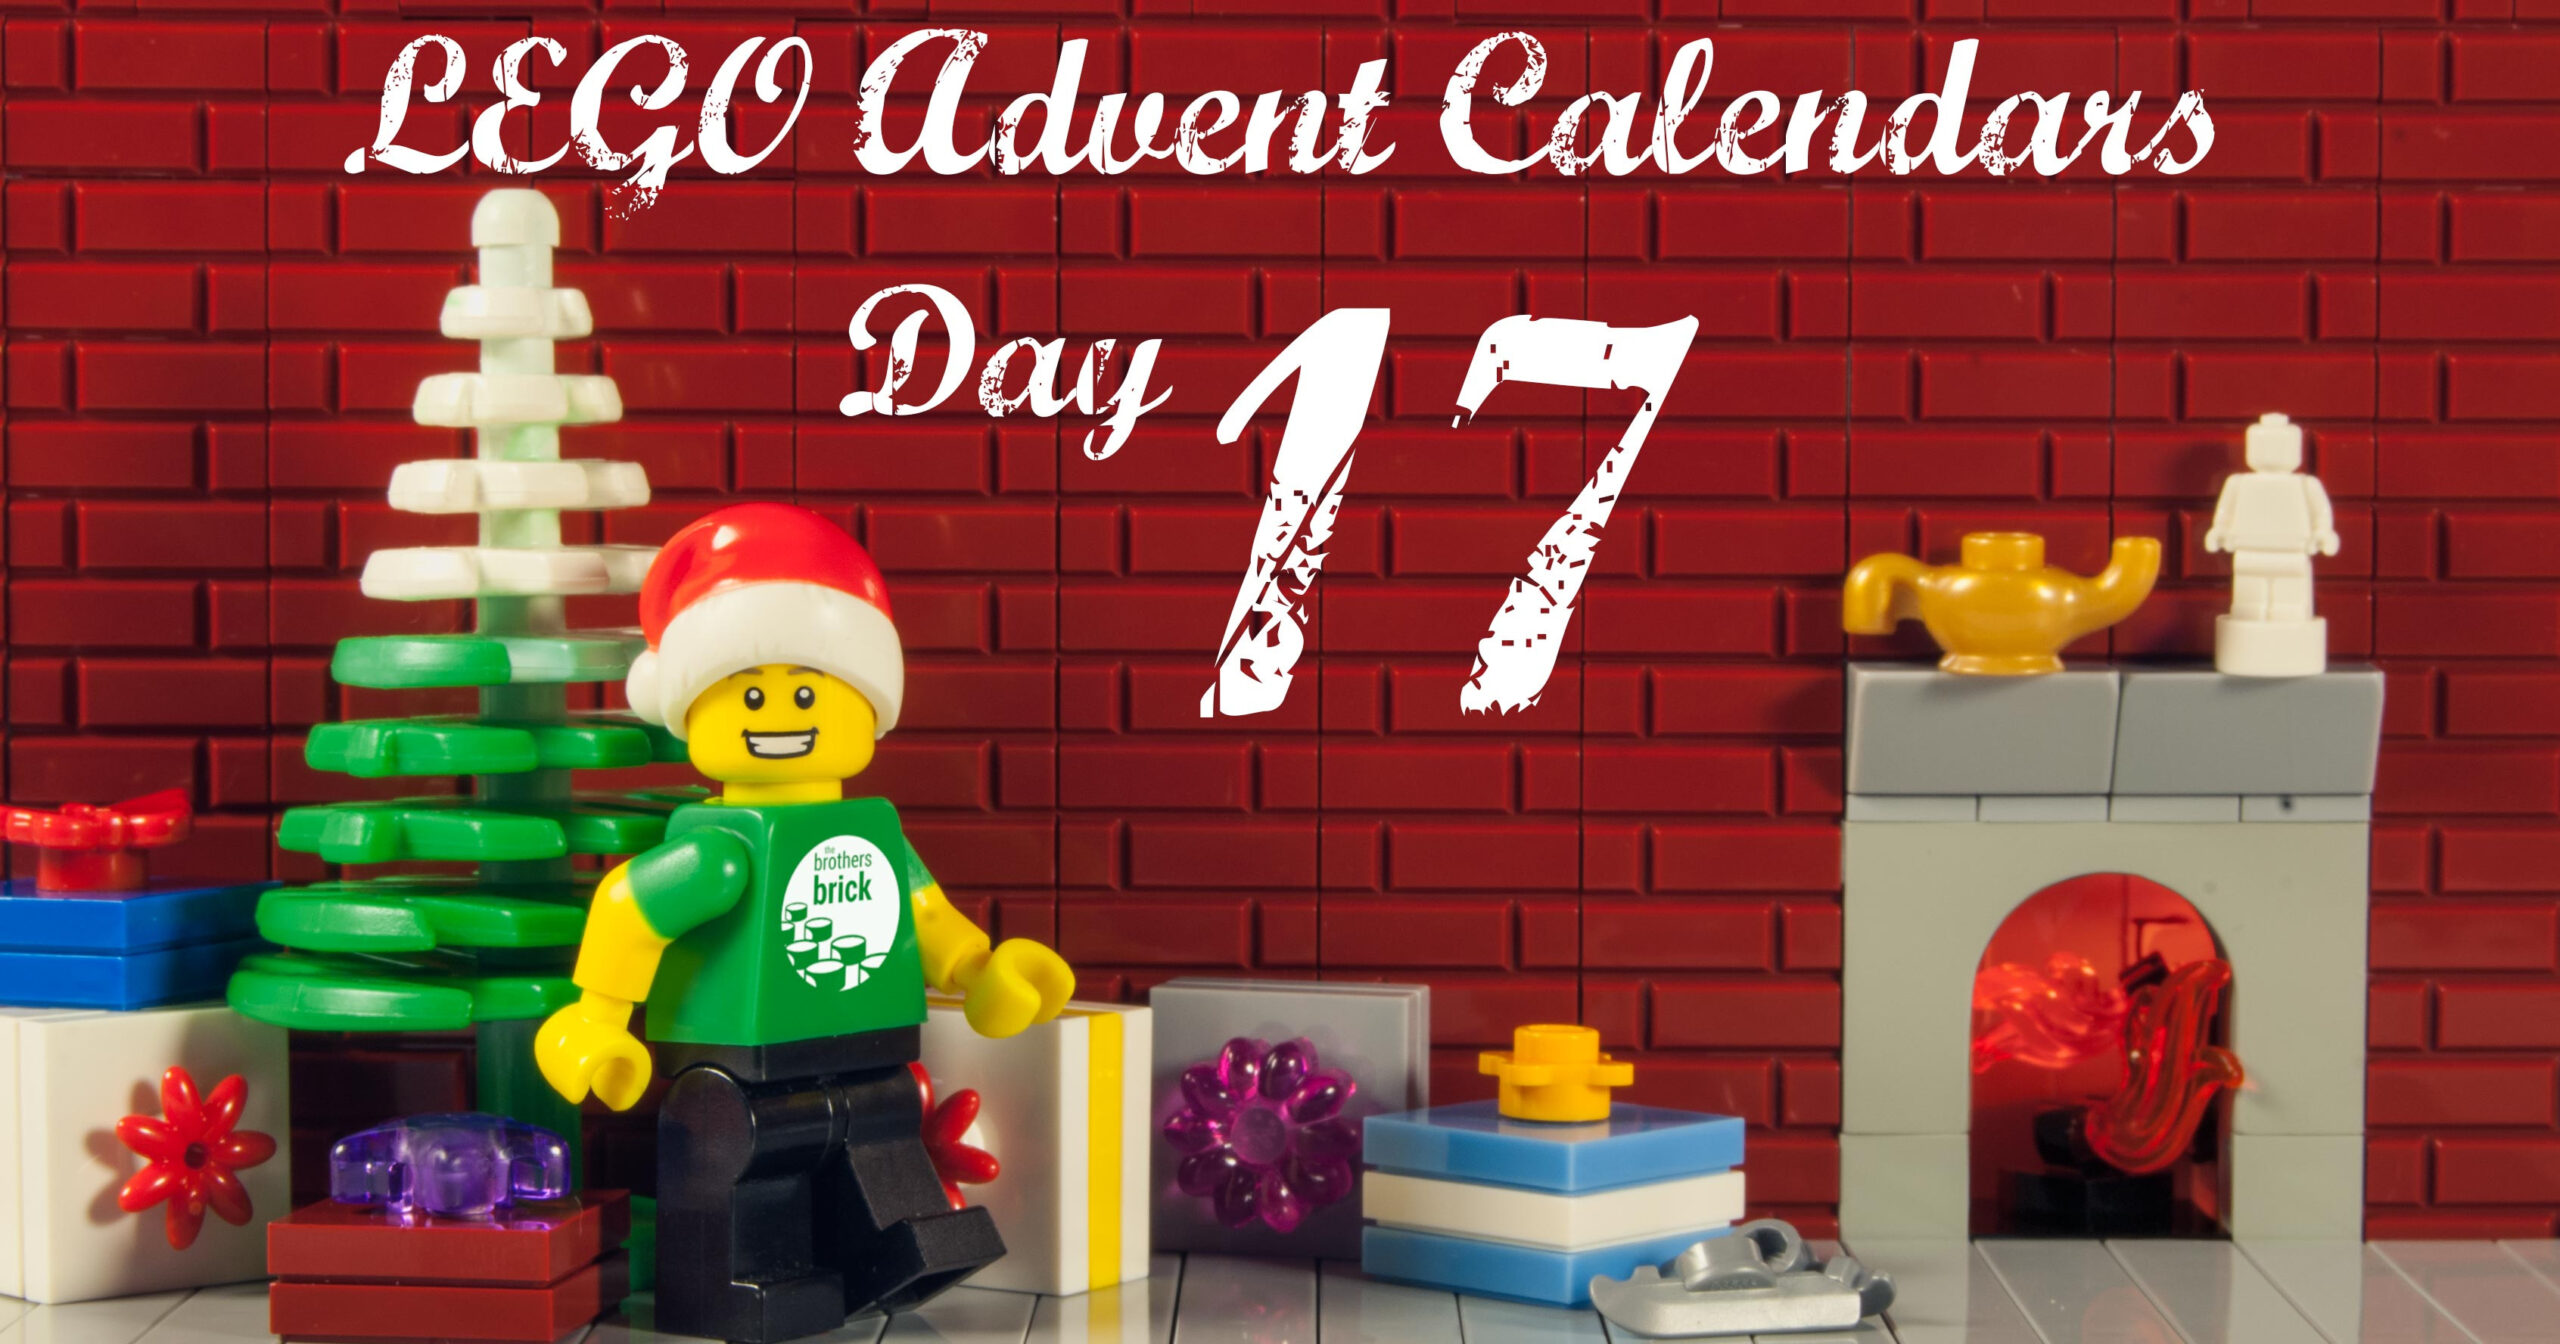 2017 Lego Advent Calendars: Day 17 | The Brothers Brick  What Is On An Advent Calendar